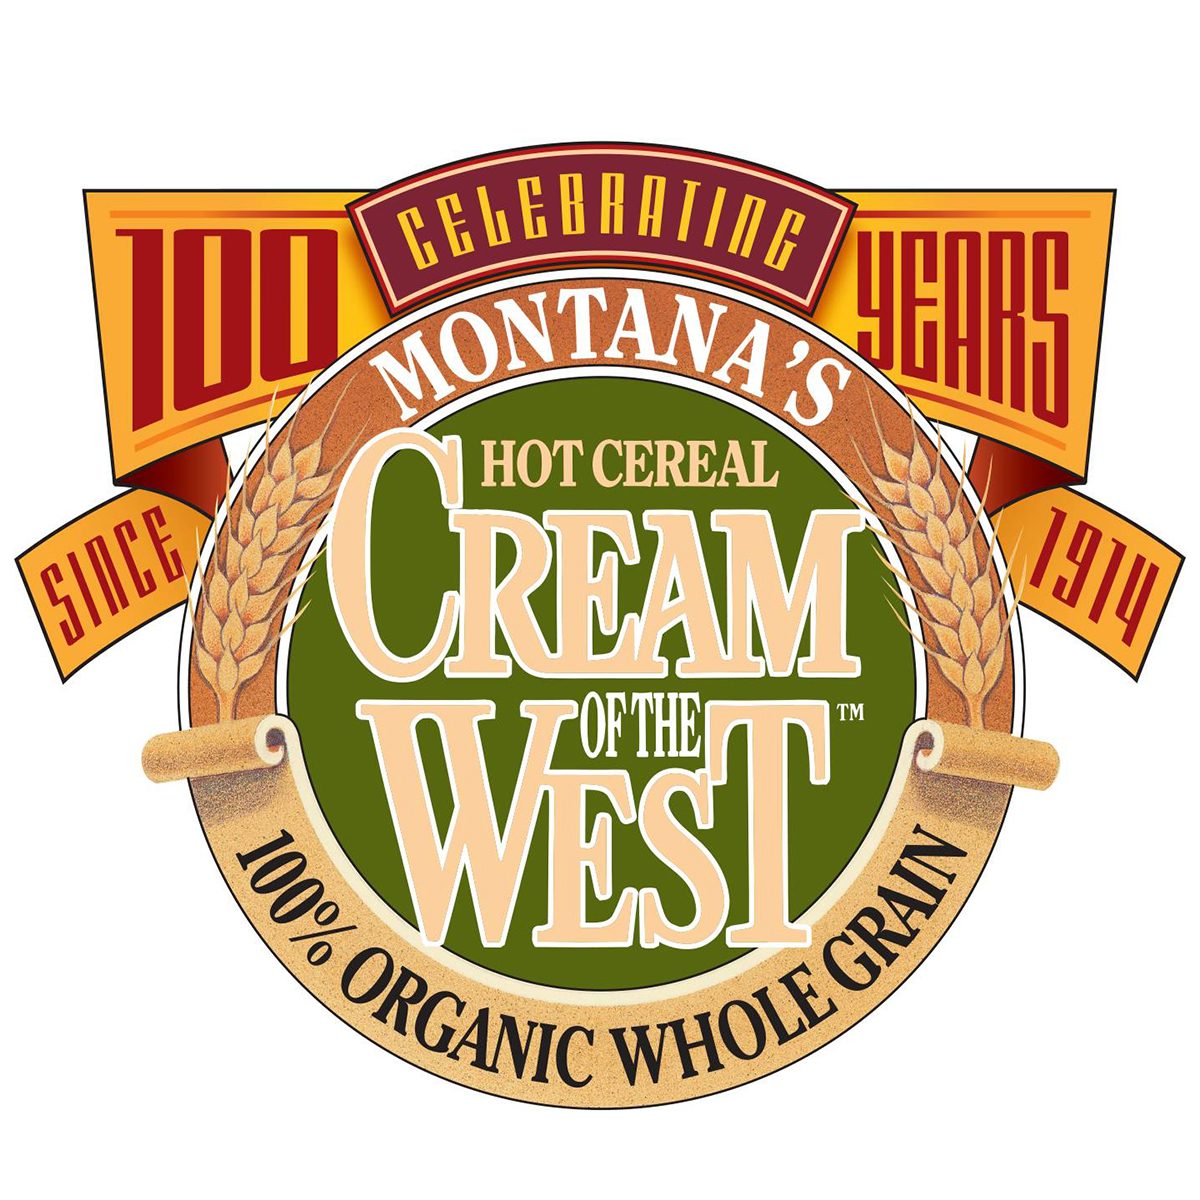 <p><strong><a class="SWhtmlLink" href="https://creamofthewest.com" rel="noopener">Cream of the West</a>, Harlowton</strong></p> <p>If hot, whole-grain cereal is your thing, you've probably had Cream of the West. The only ingredient is organic red wheat, and it's made with 100-percent whole grains that are milled and grown in Montana.</p>